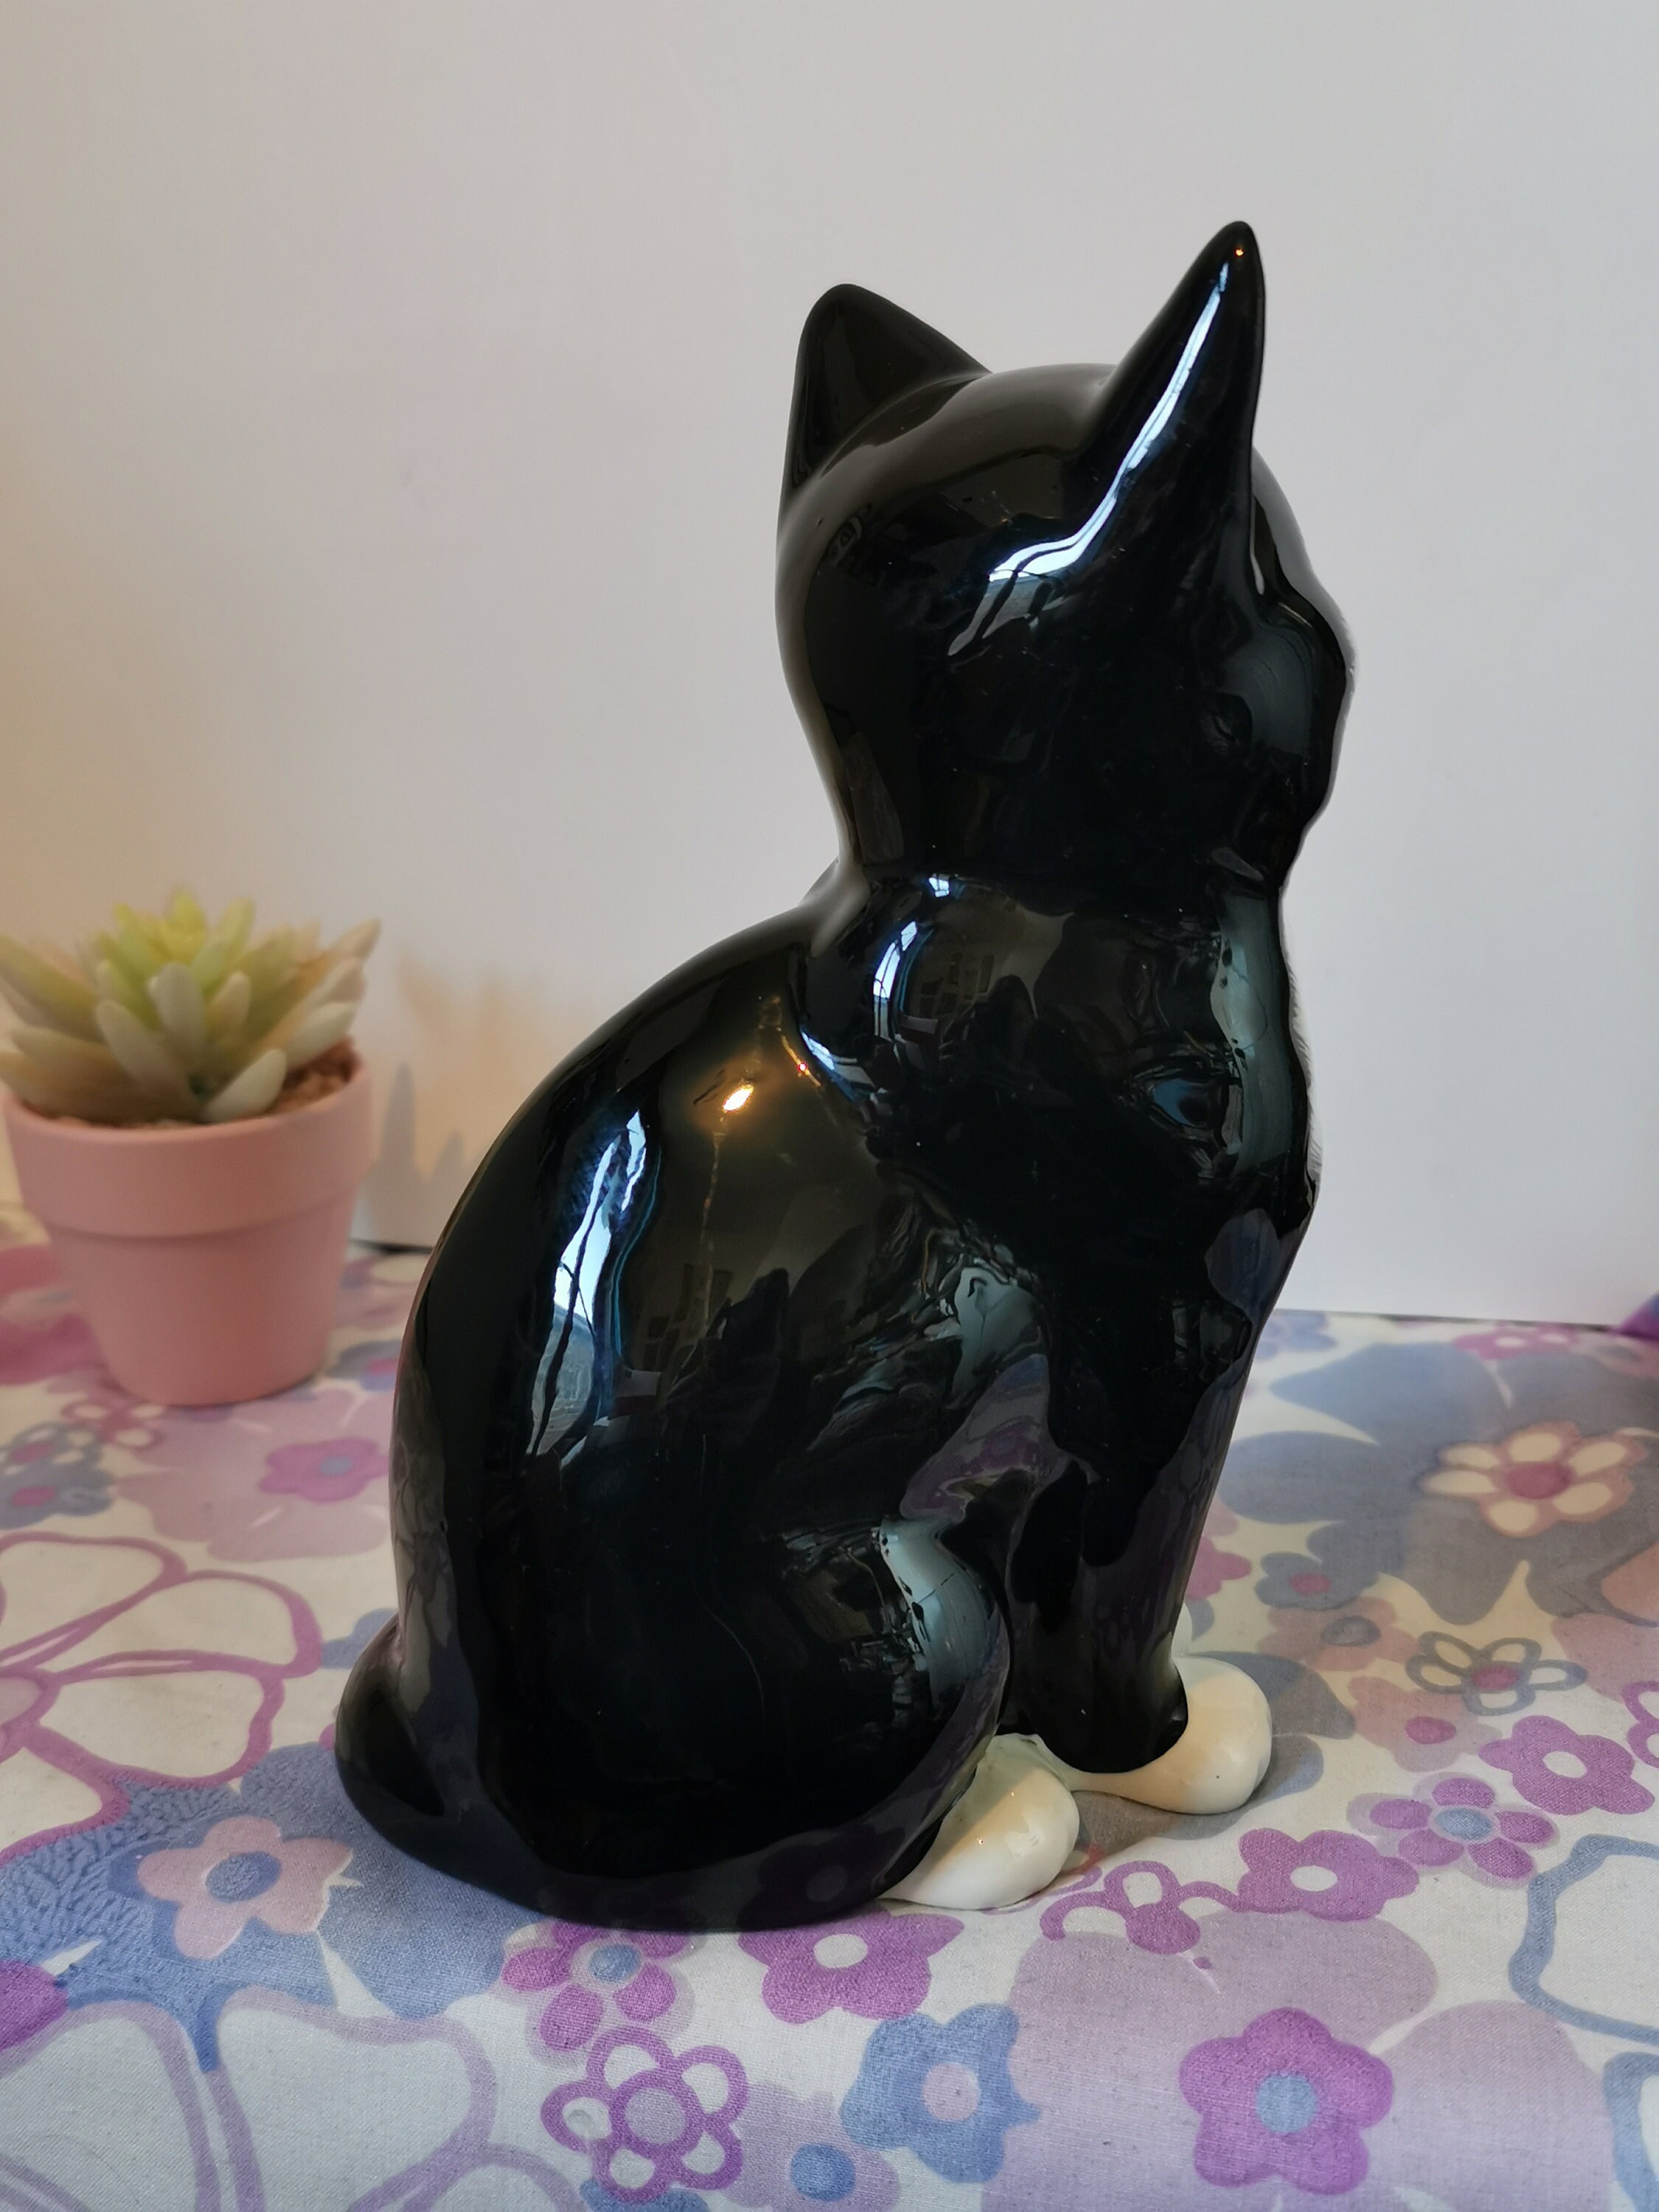 Gorgeous TUXEDO CAT Vintage FIGURINE by Just Cats & Co, Large Ceramic Black  and White Cat Ornament, Glass Eyes, Crazy Cat Lady Home Decor -  UK